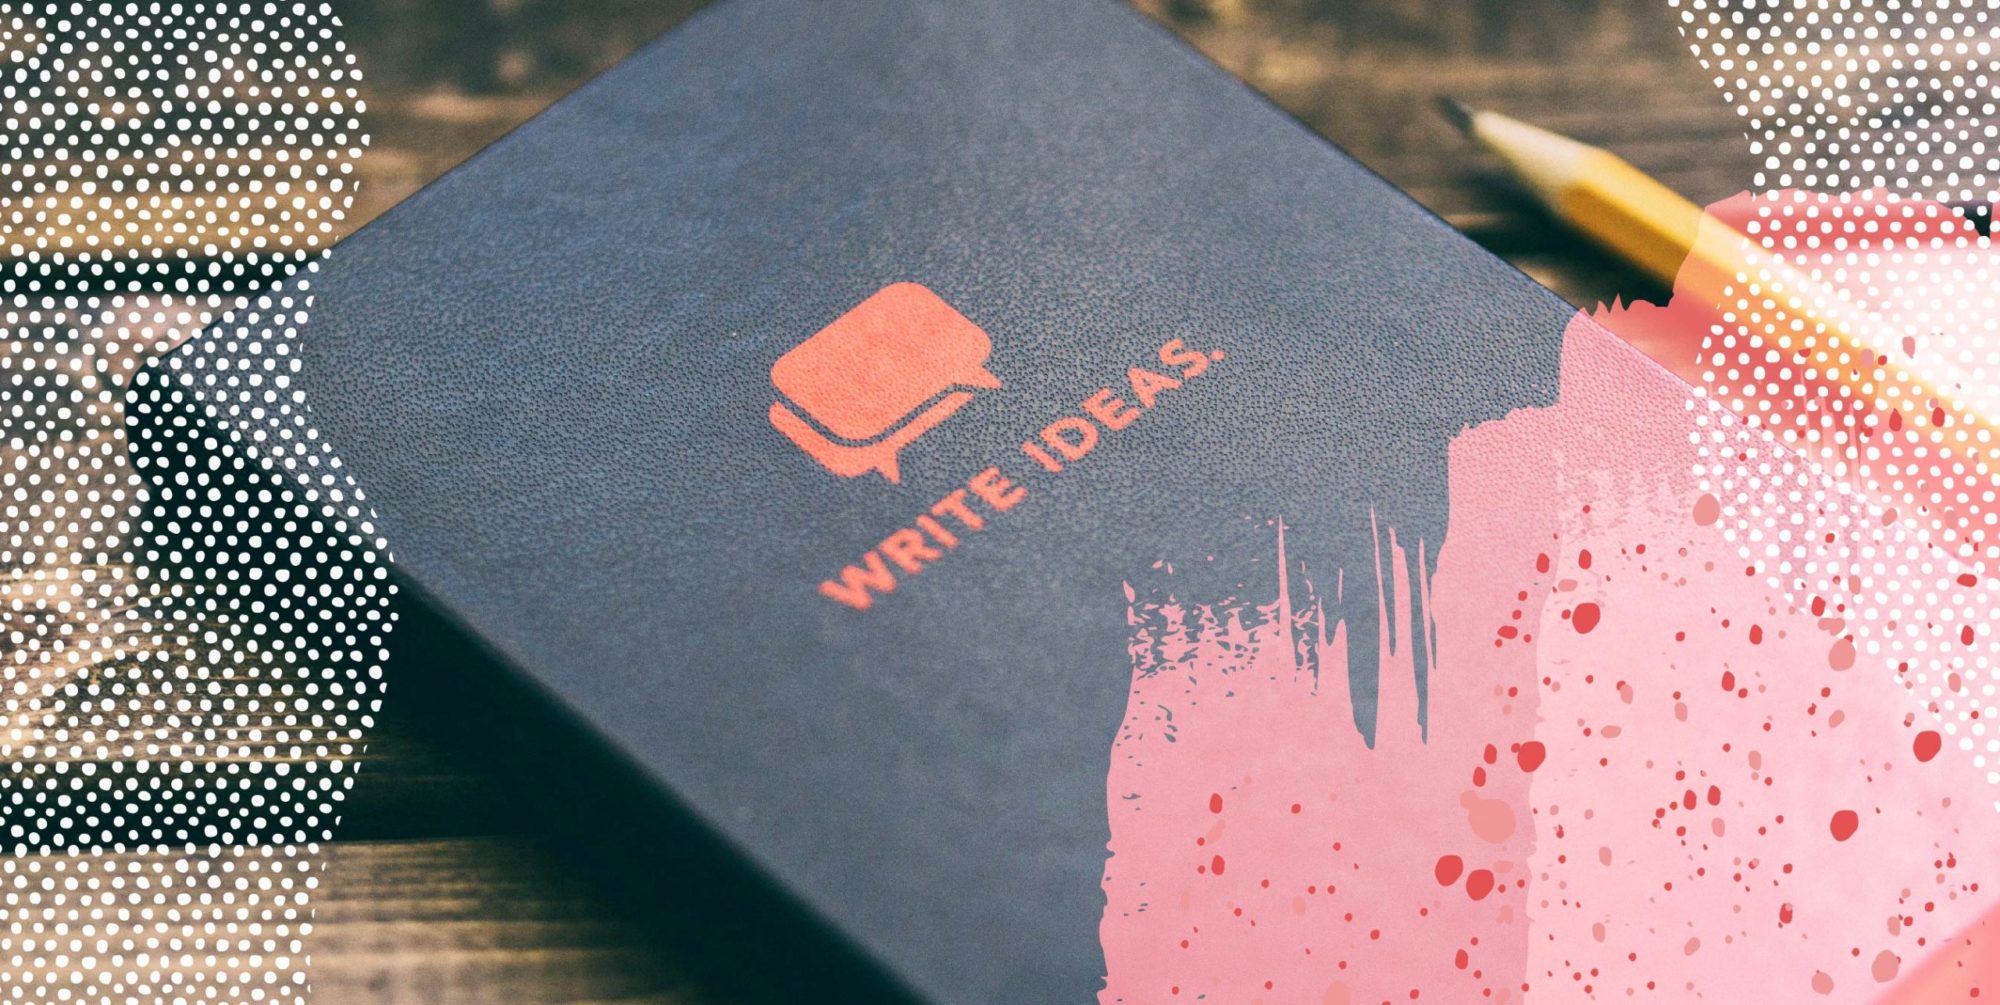 A journal rests on a desk. The journal reads, "Write ideas."